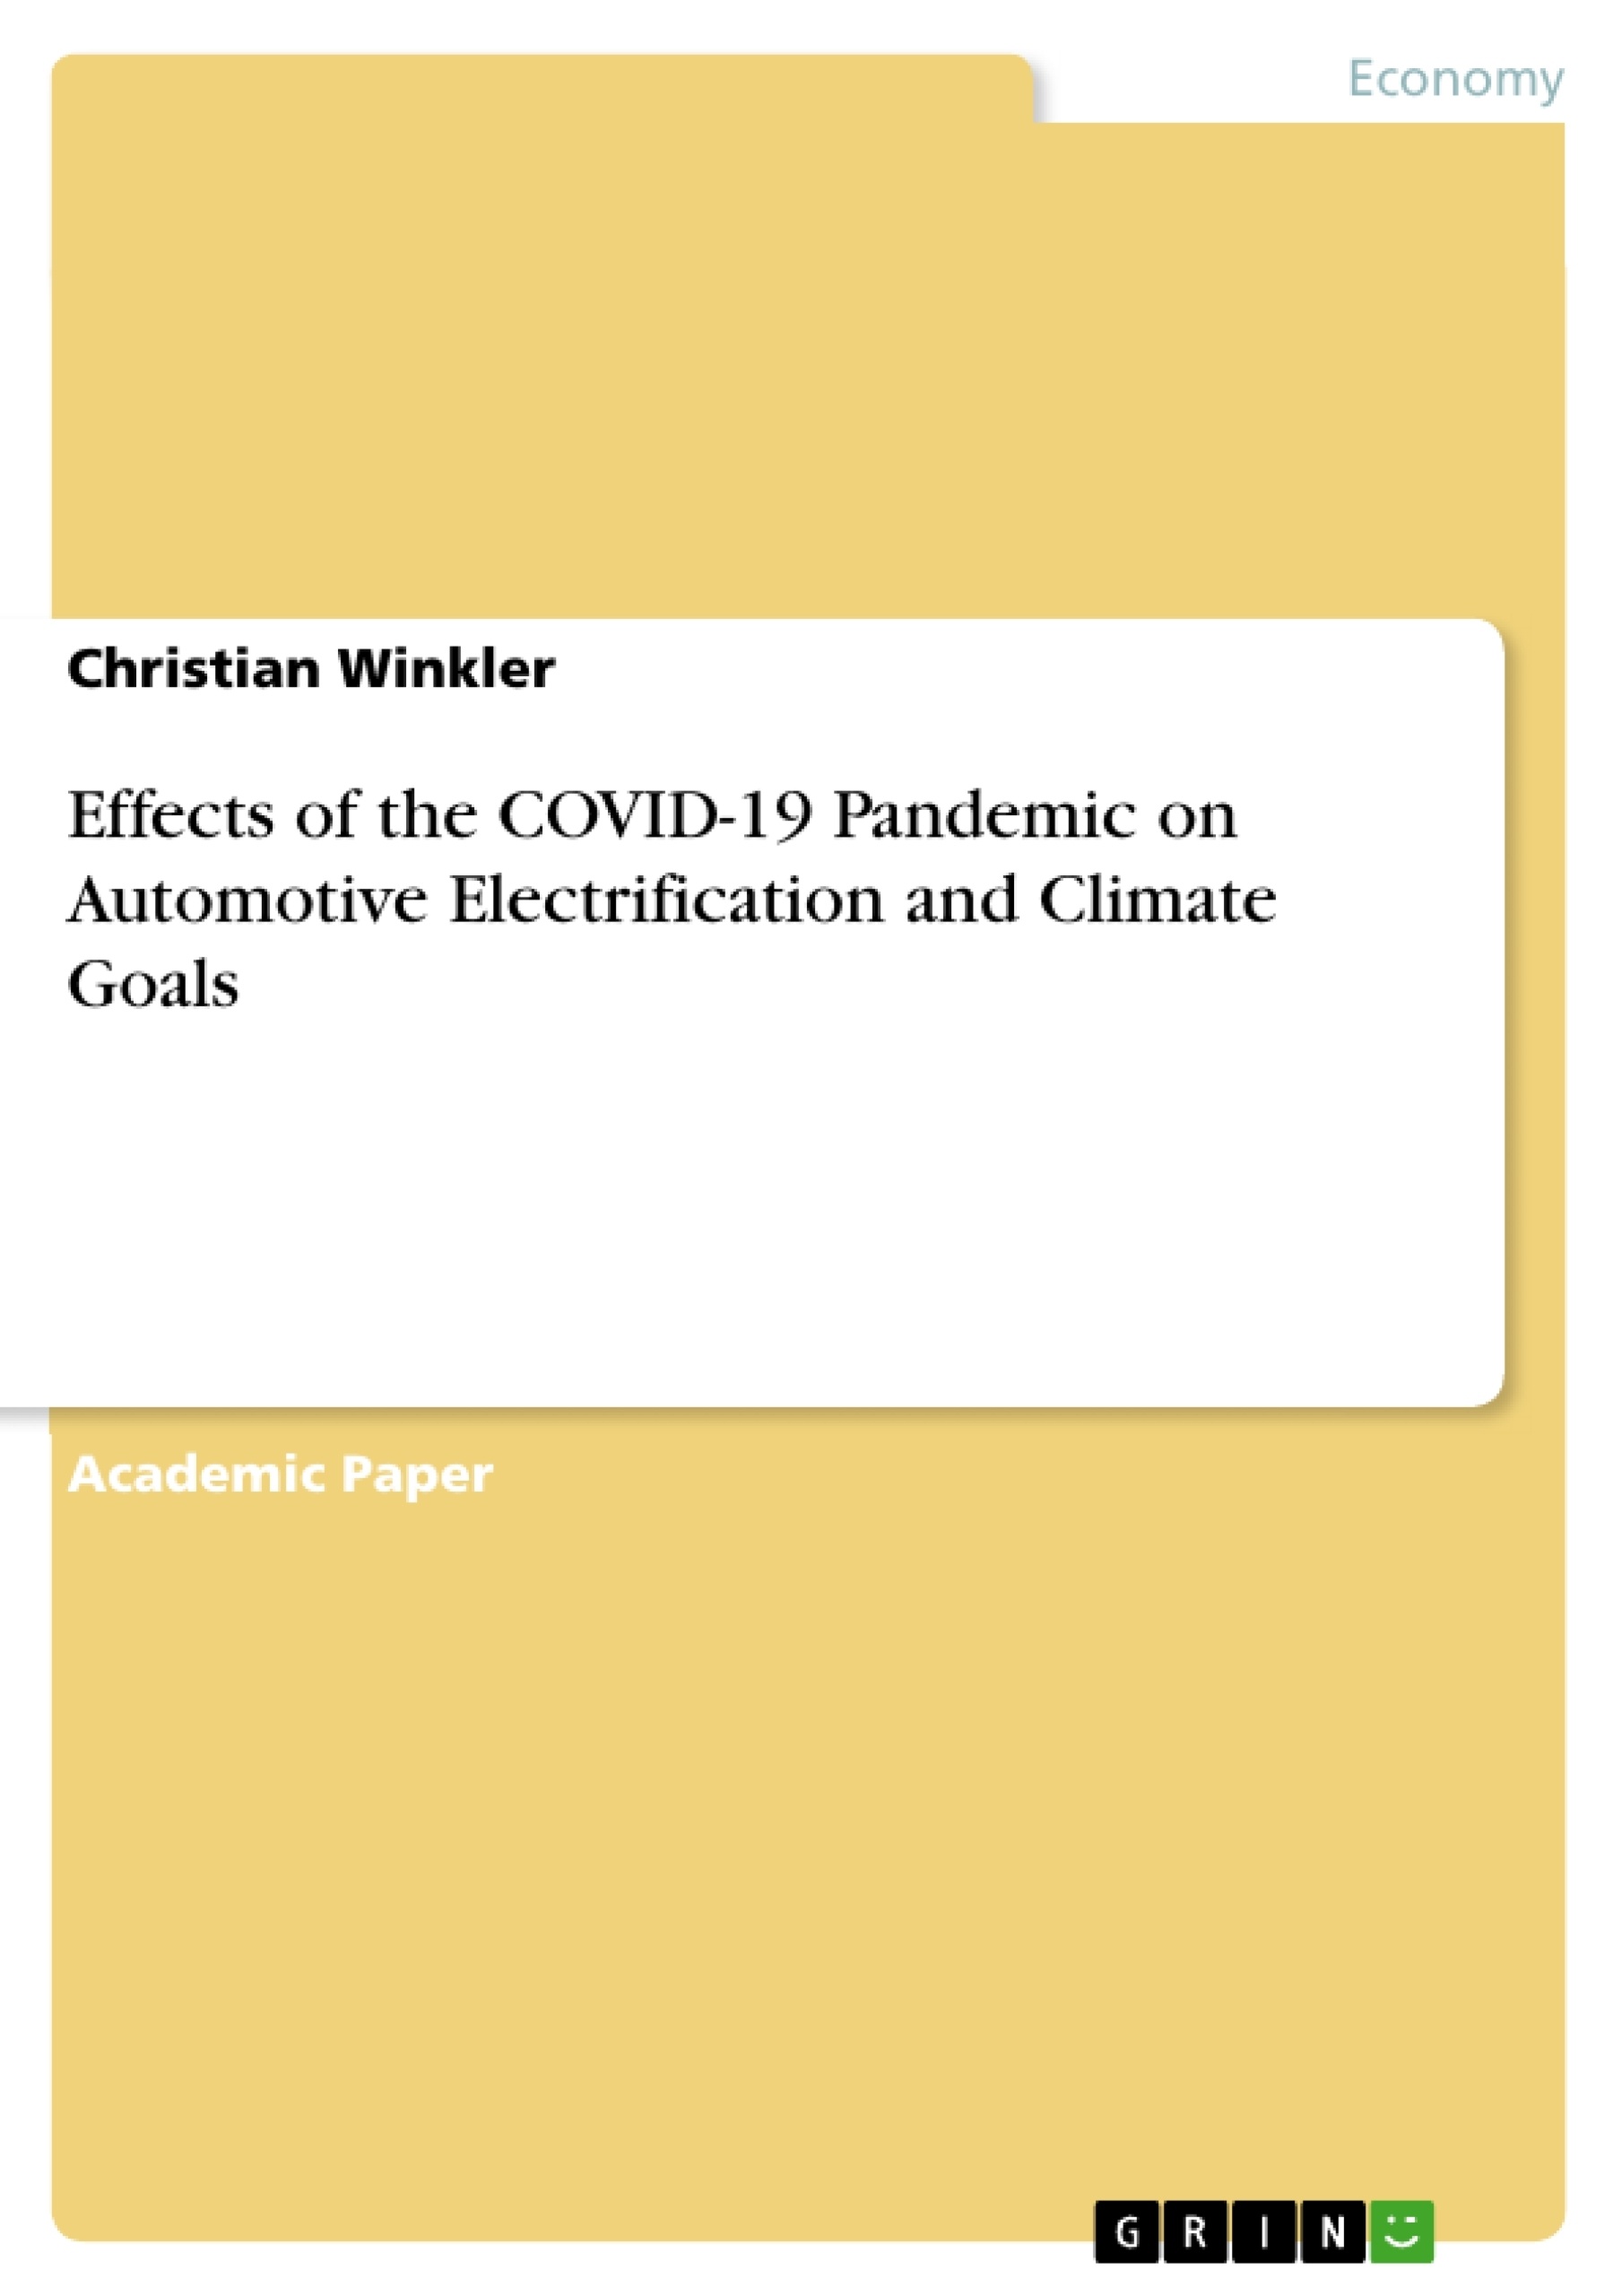 Title: Effects of the COVID-19 Pandemic on Automotive Electrification and Climate Goals